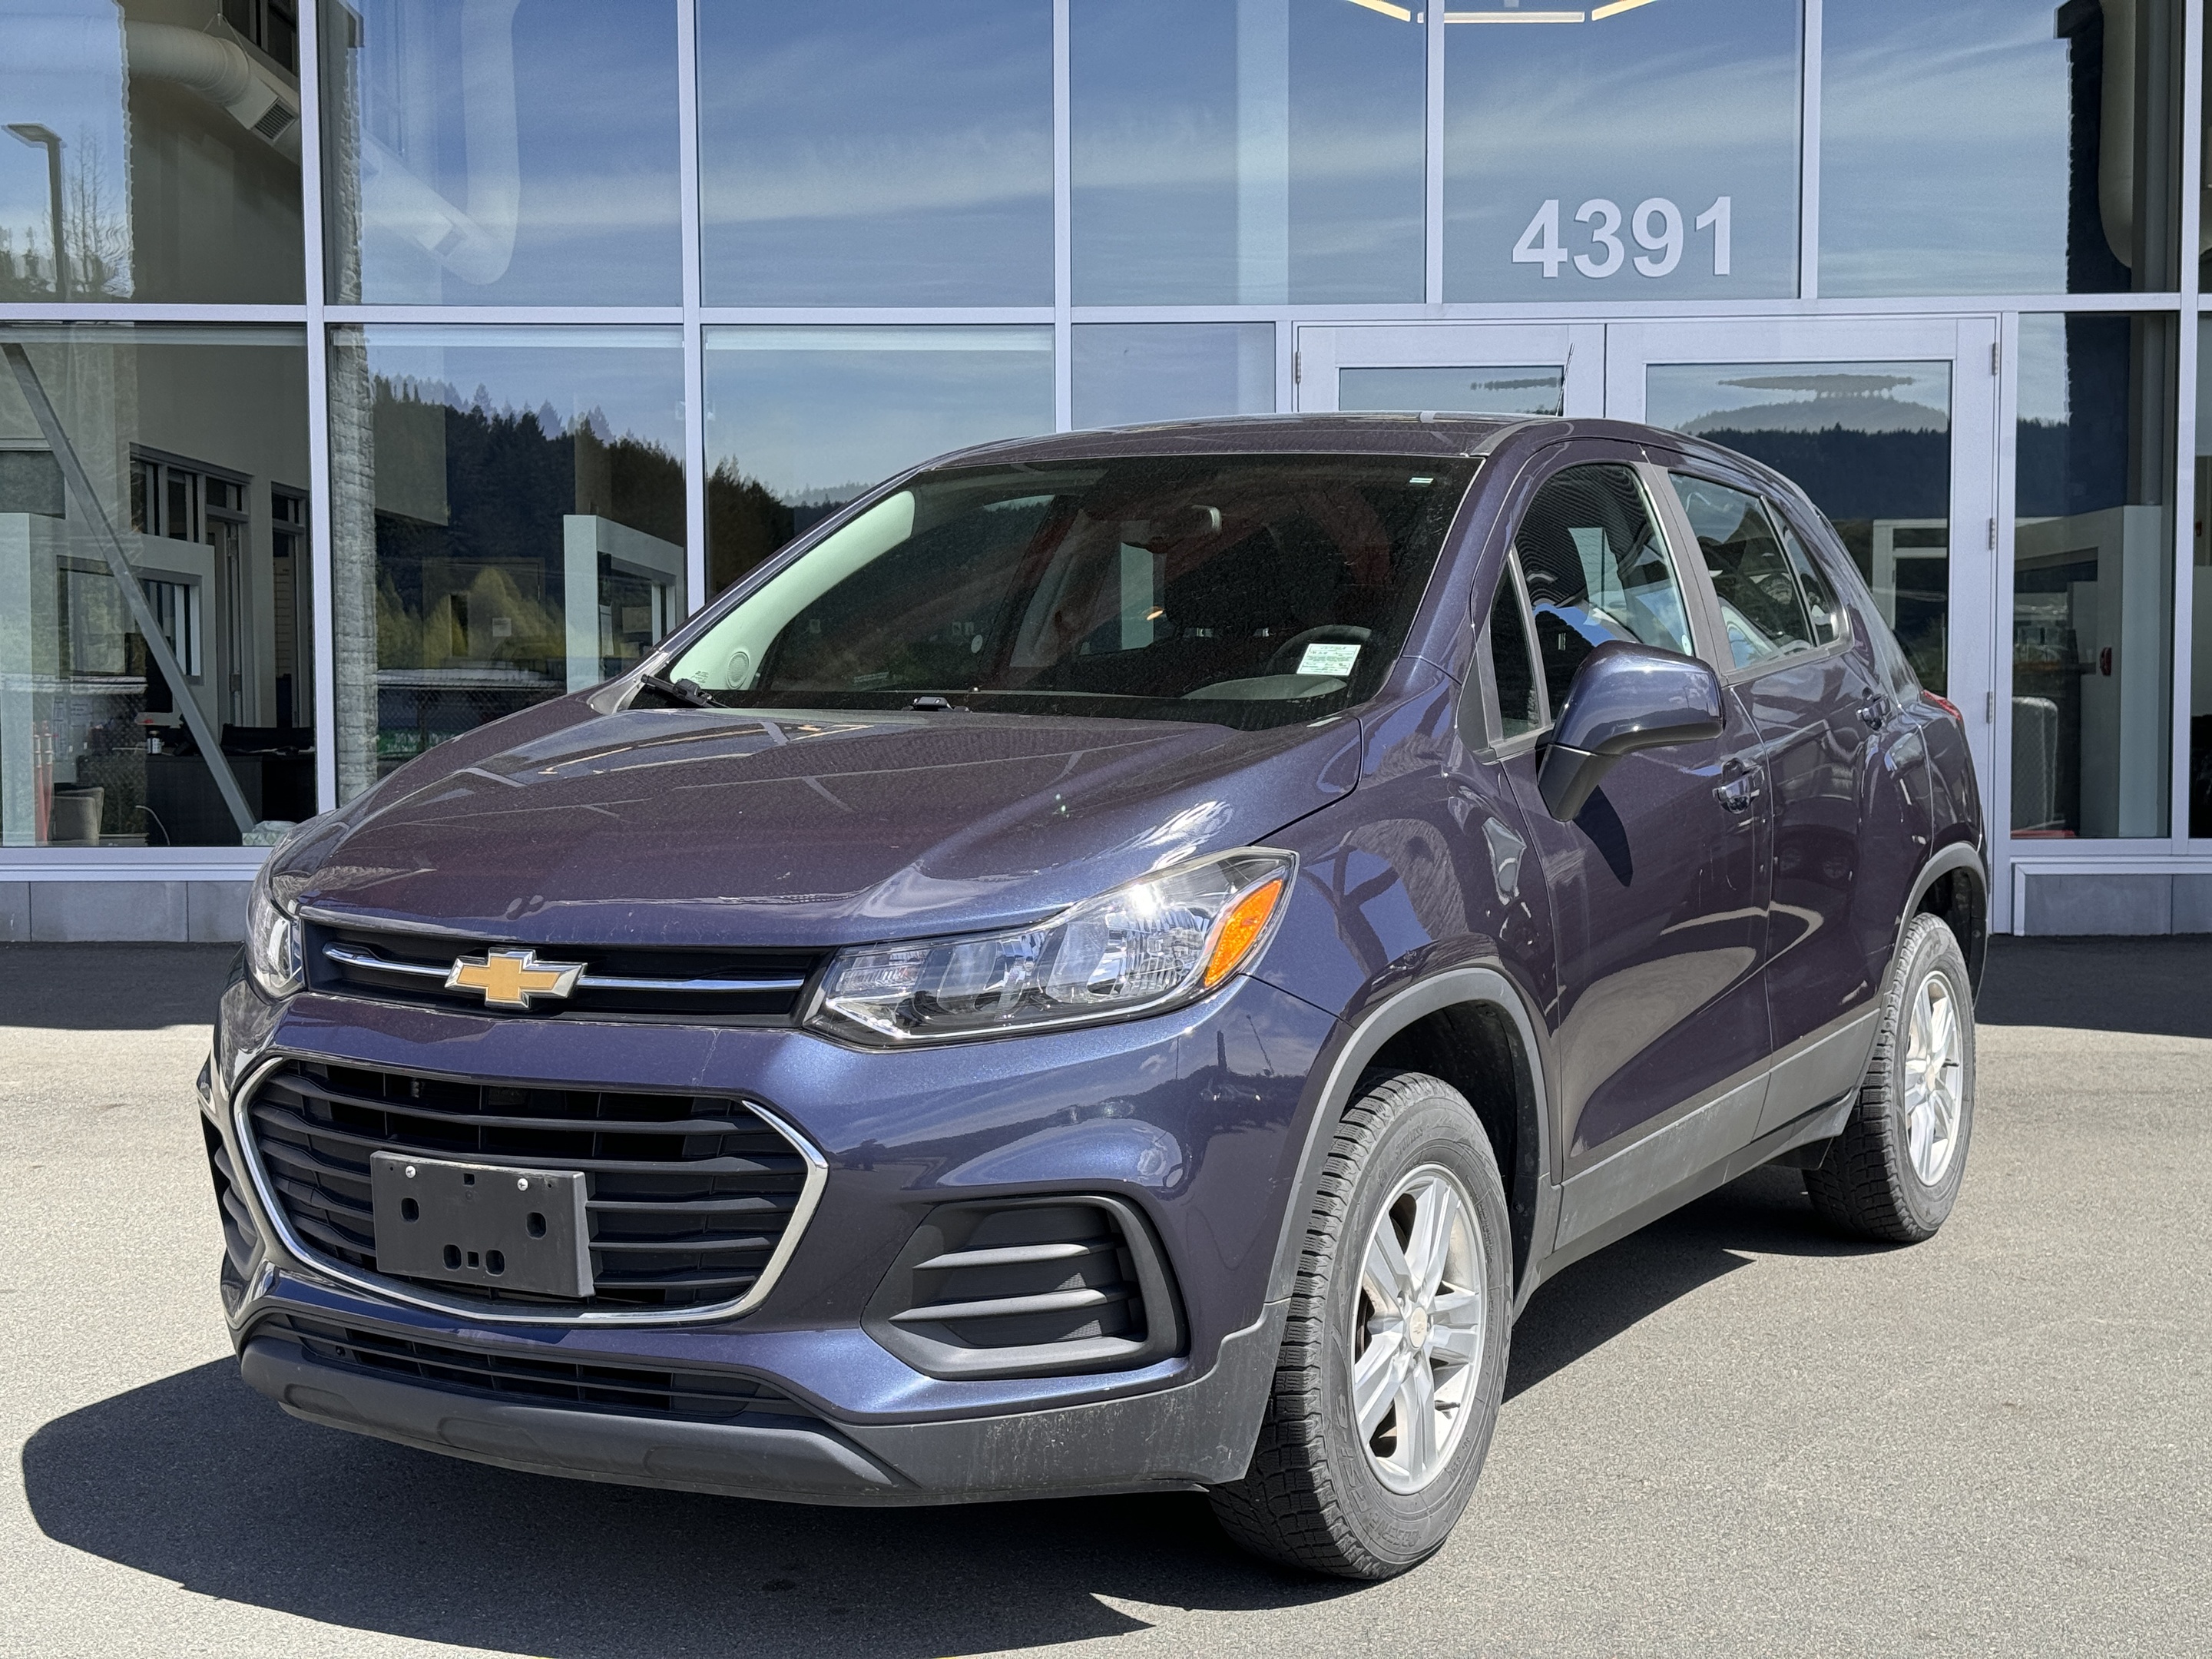 2018 Chevrolet Trax LS AWD-Apple CarPlay,Air Conditioning,Back Up Cam